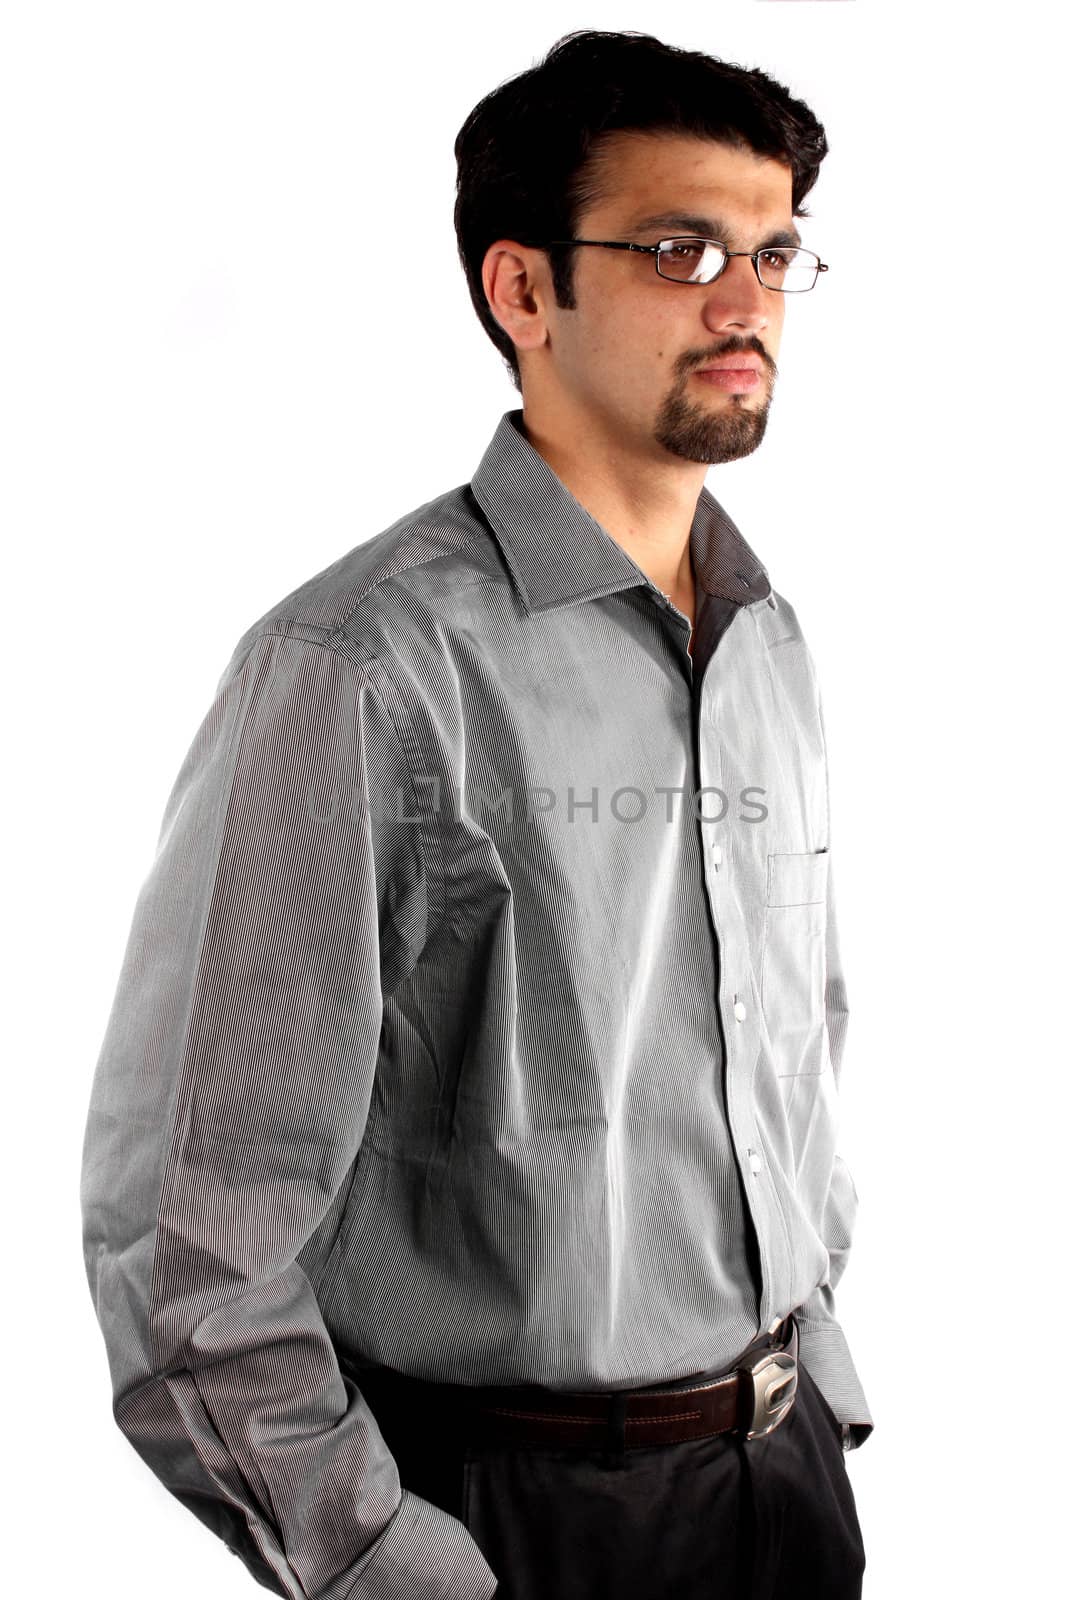 A smart looking young Indian guy, on white background.